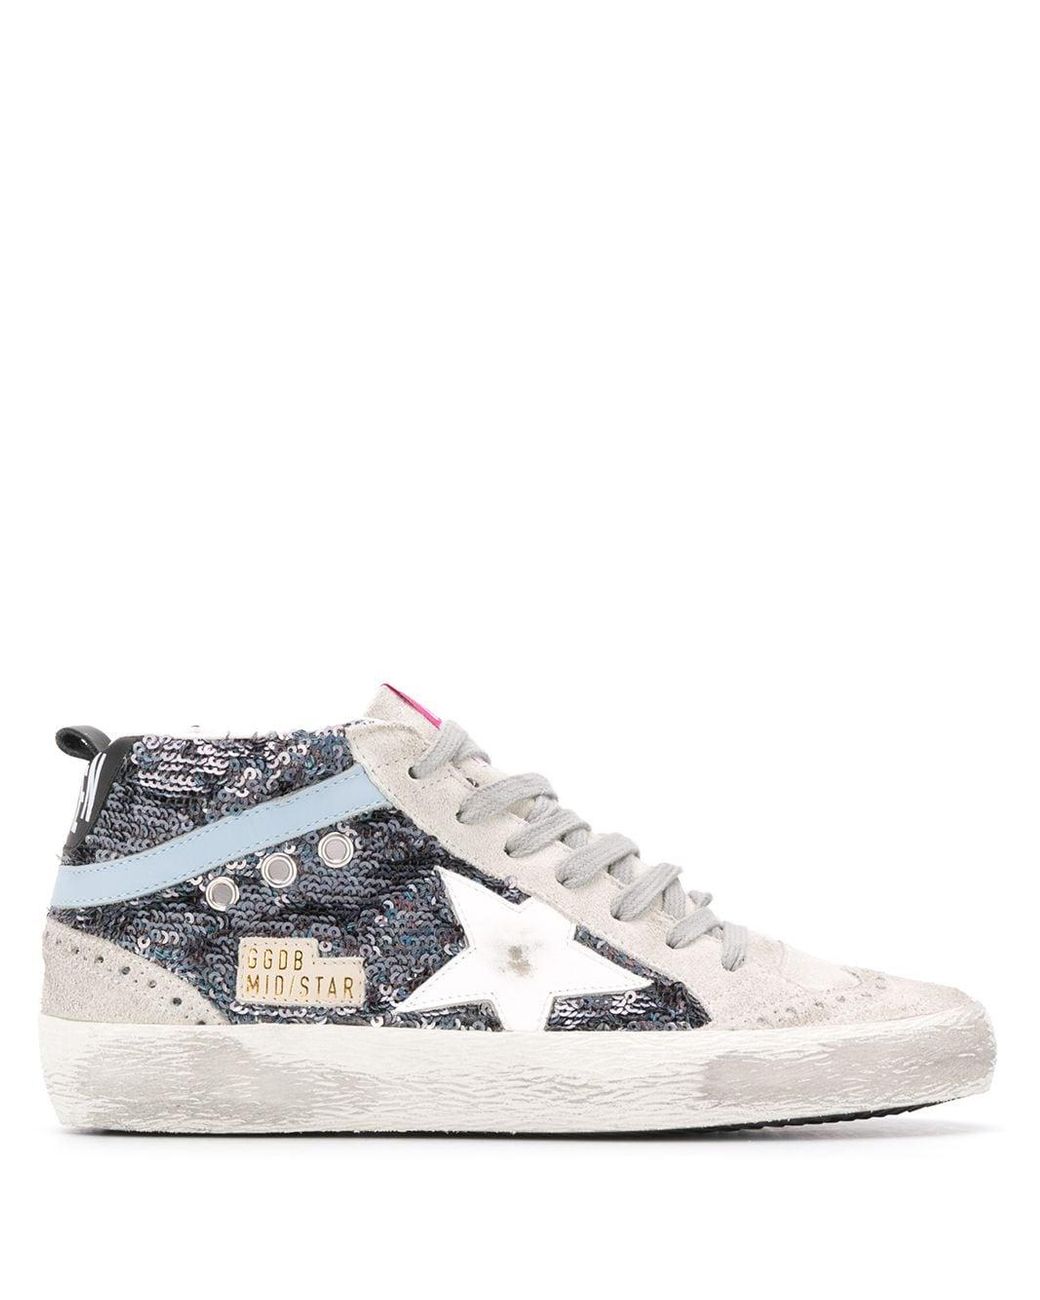 Golden Goose Mid Star Sequinned High-top Sneakers in Blue | Lyst